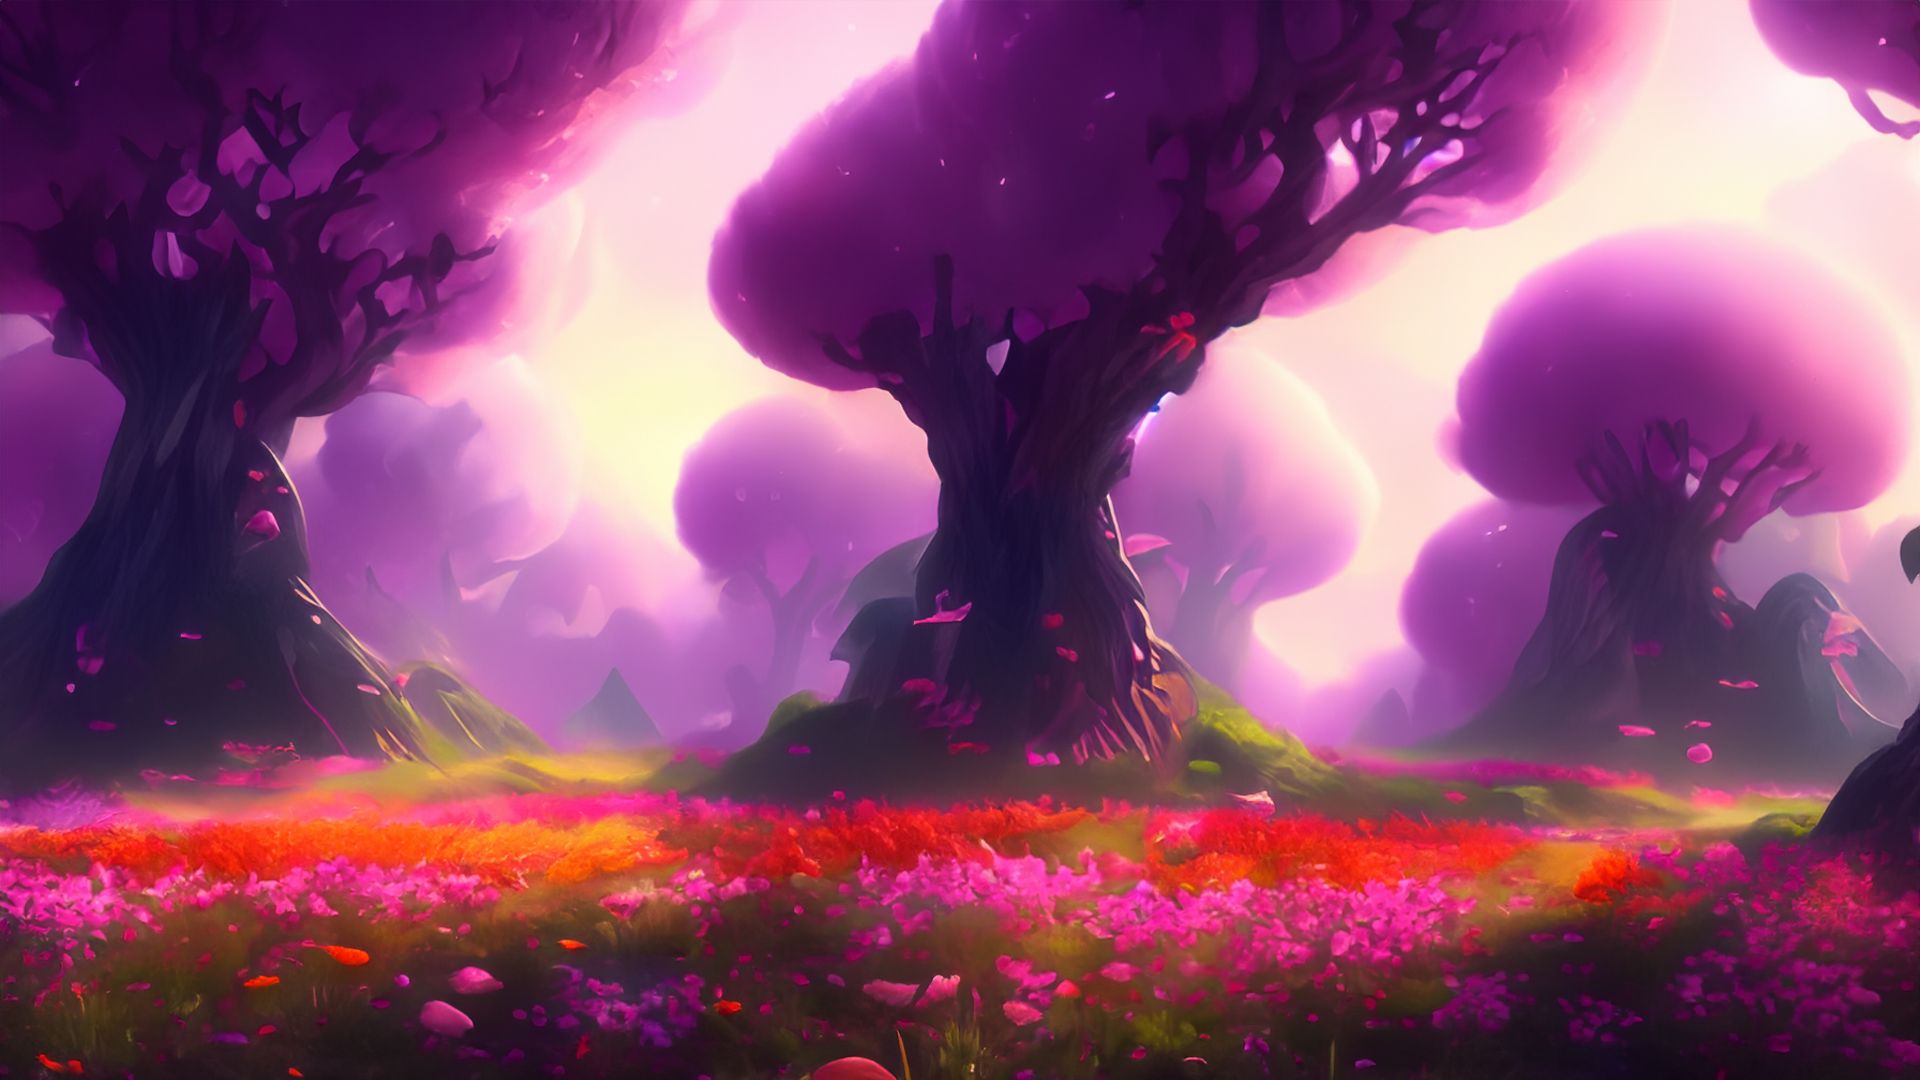 Fantasy forest with animated cherry trees